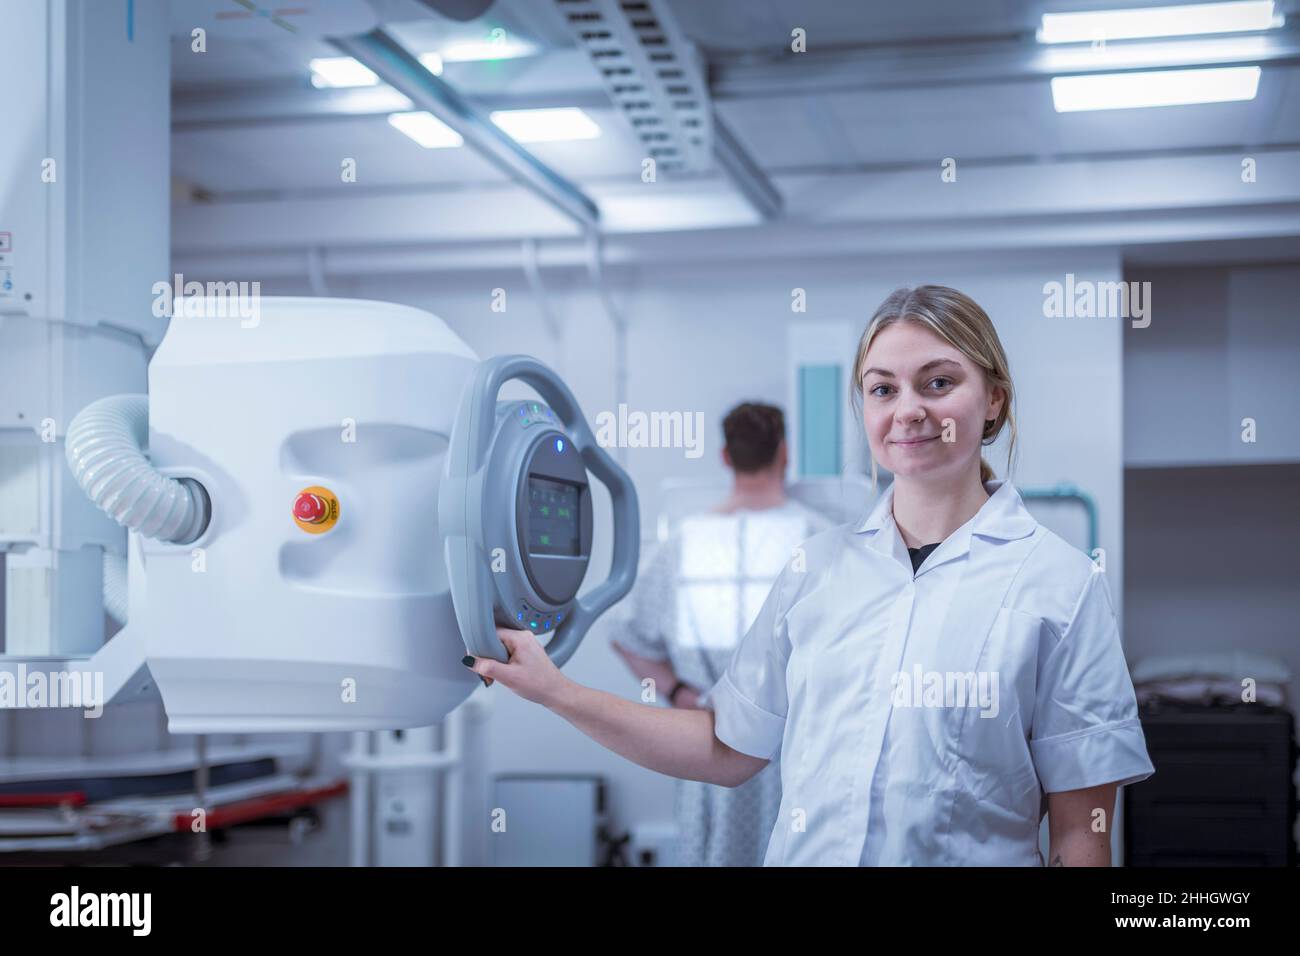 Portrait of radiologist setting up chest x-ray in hospital Stock Photo